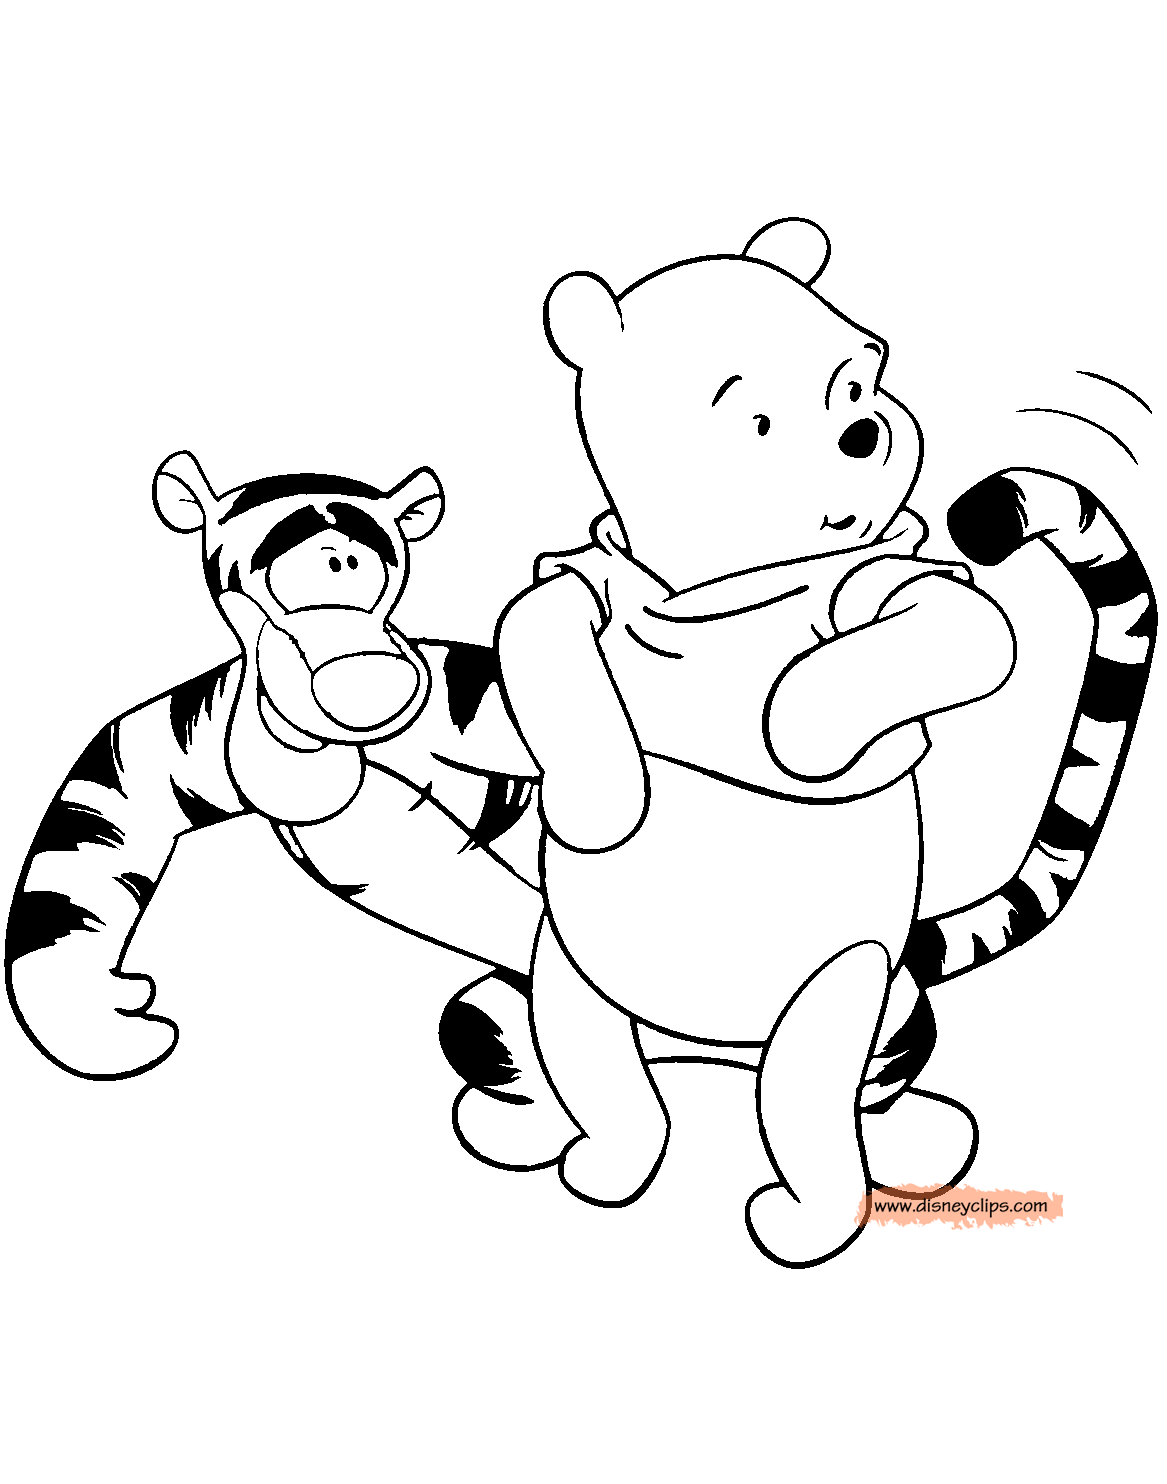 Winnie the Pooh & Tigger Coloring Pages | Disneyclips.com